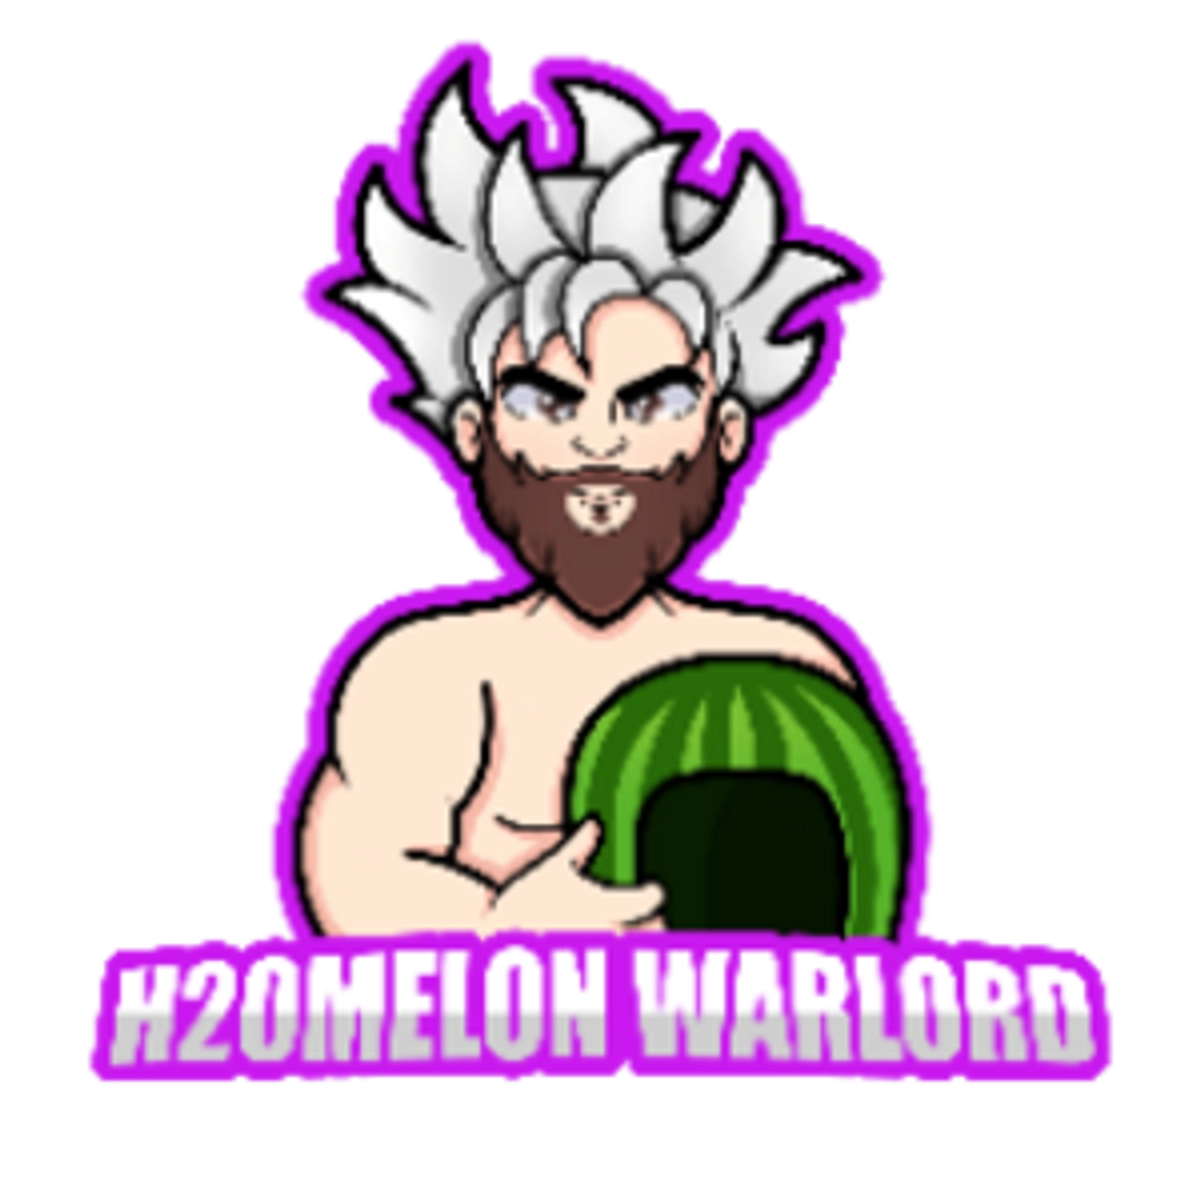 h2omelonwarlord